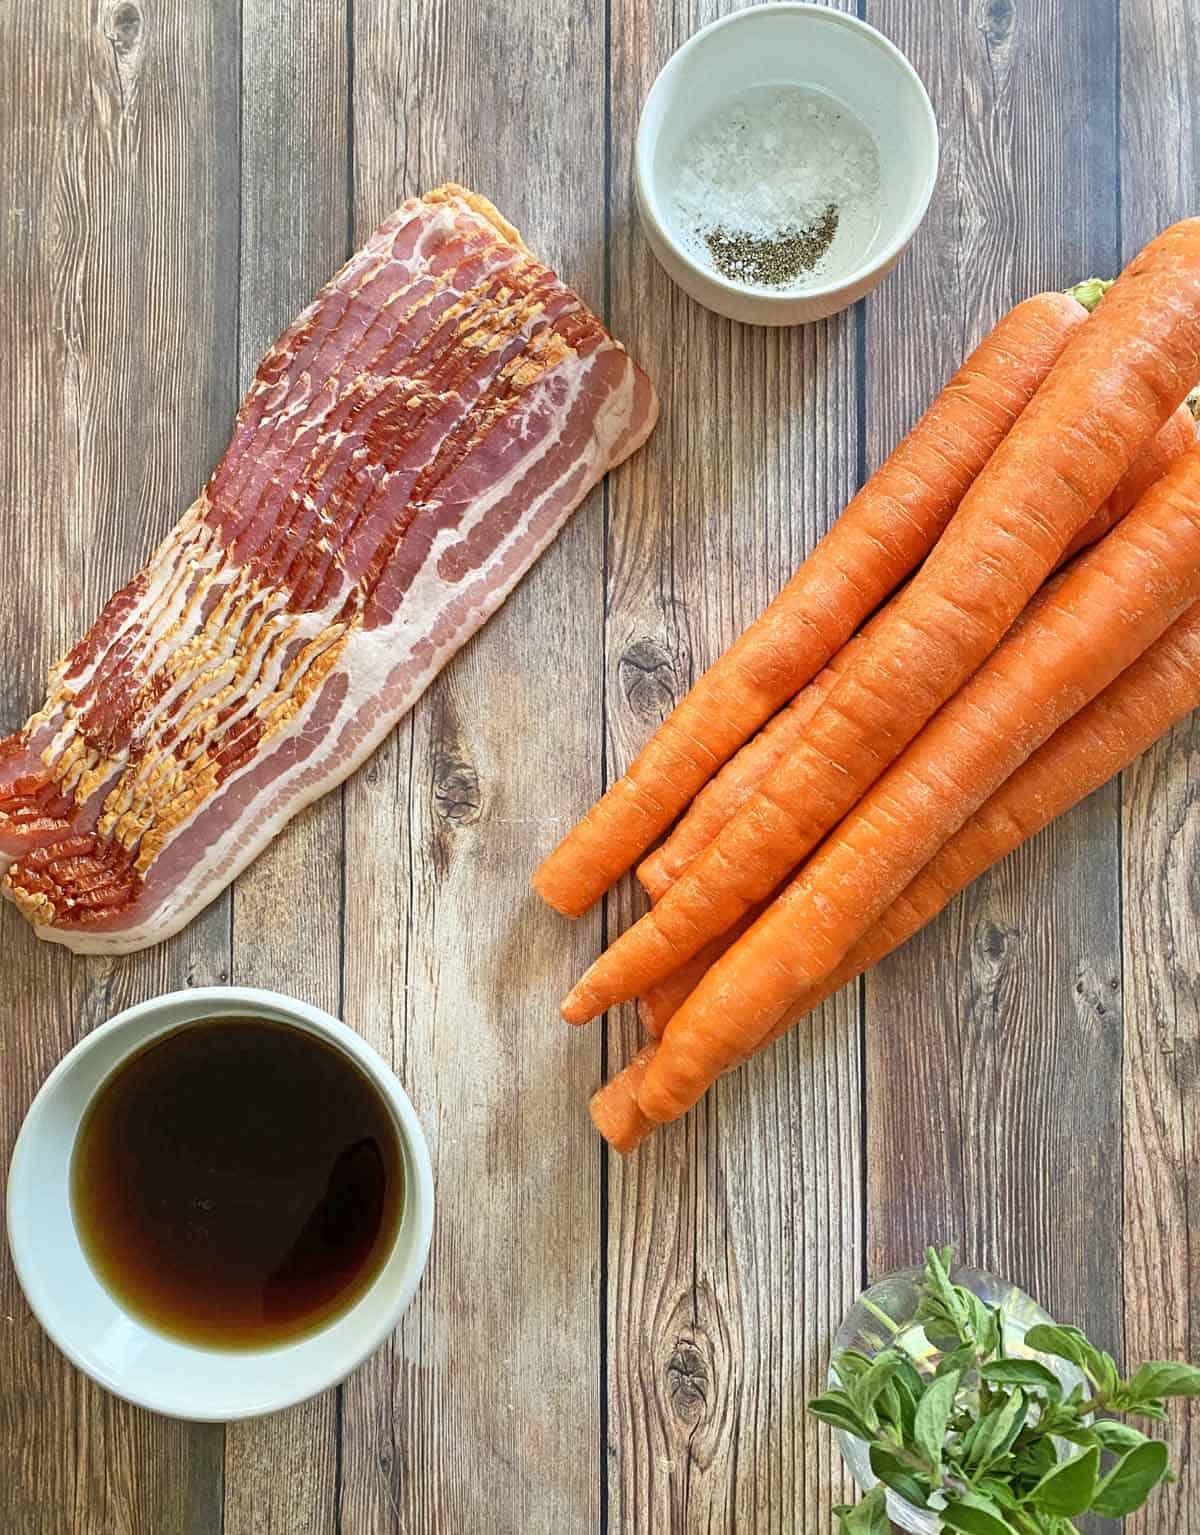 A slab of sliced bacon, six large carrots, a small bowl of maple syrup, and a glass vase with fresh oregano sprigs.